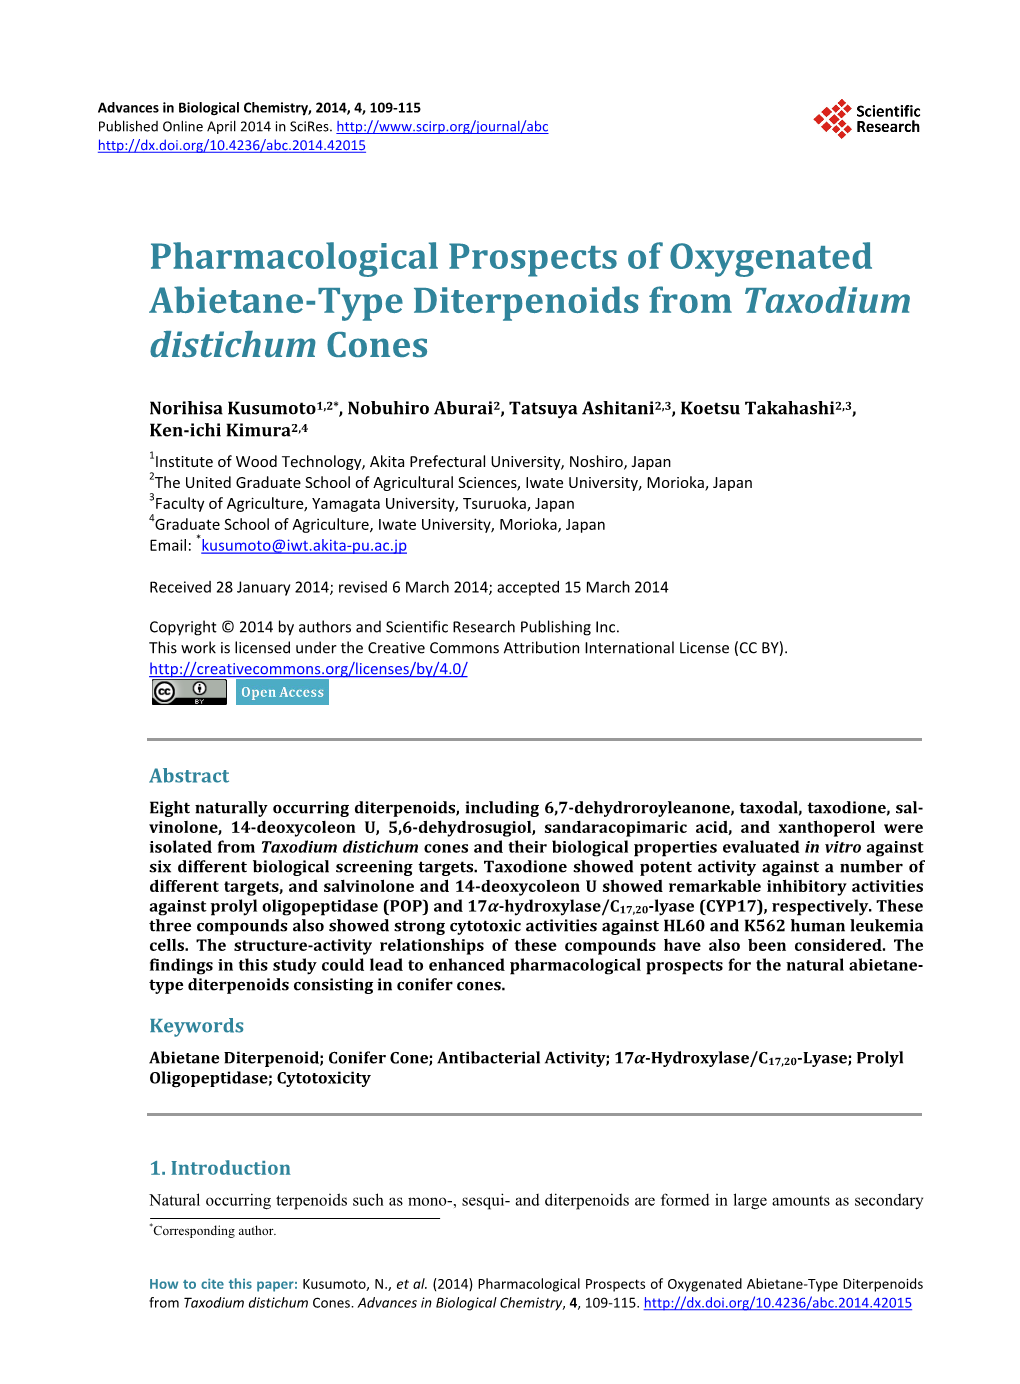 Pharmacological Prospects of Oxygenated Abietane-Type Diterpenoids from Taxodium Distichum Cones